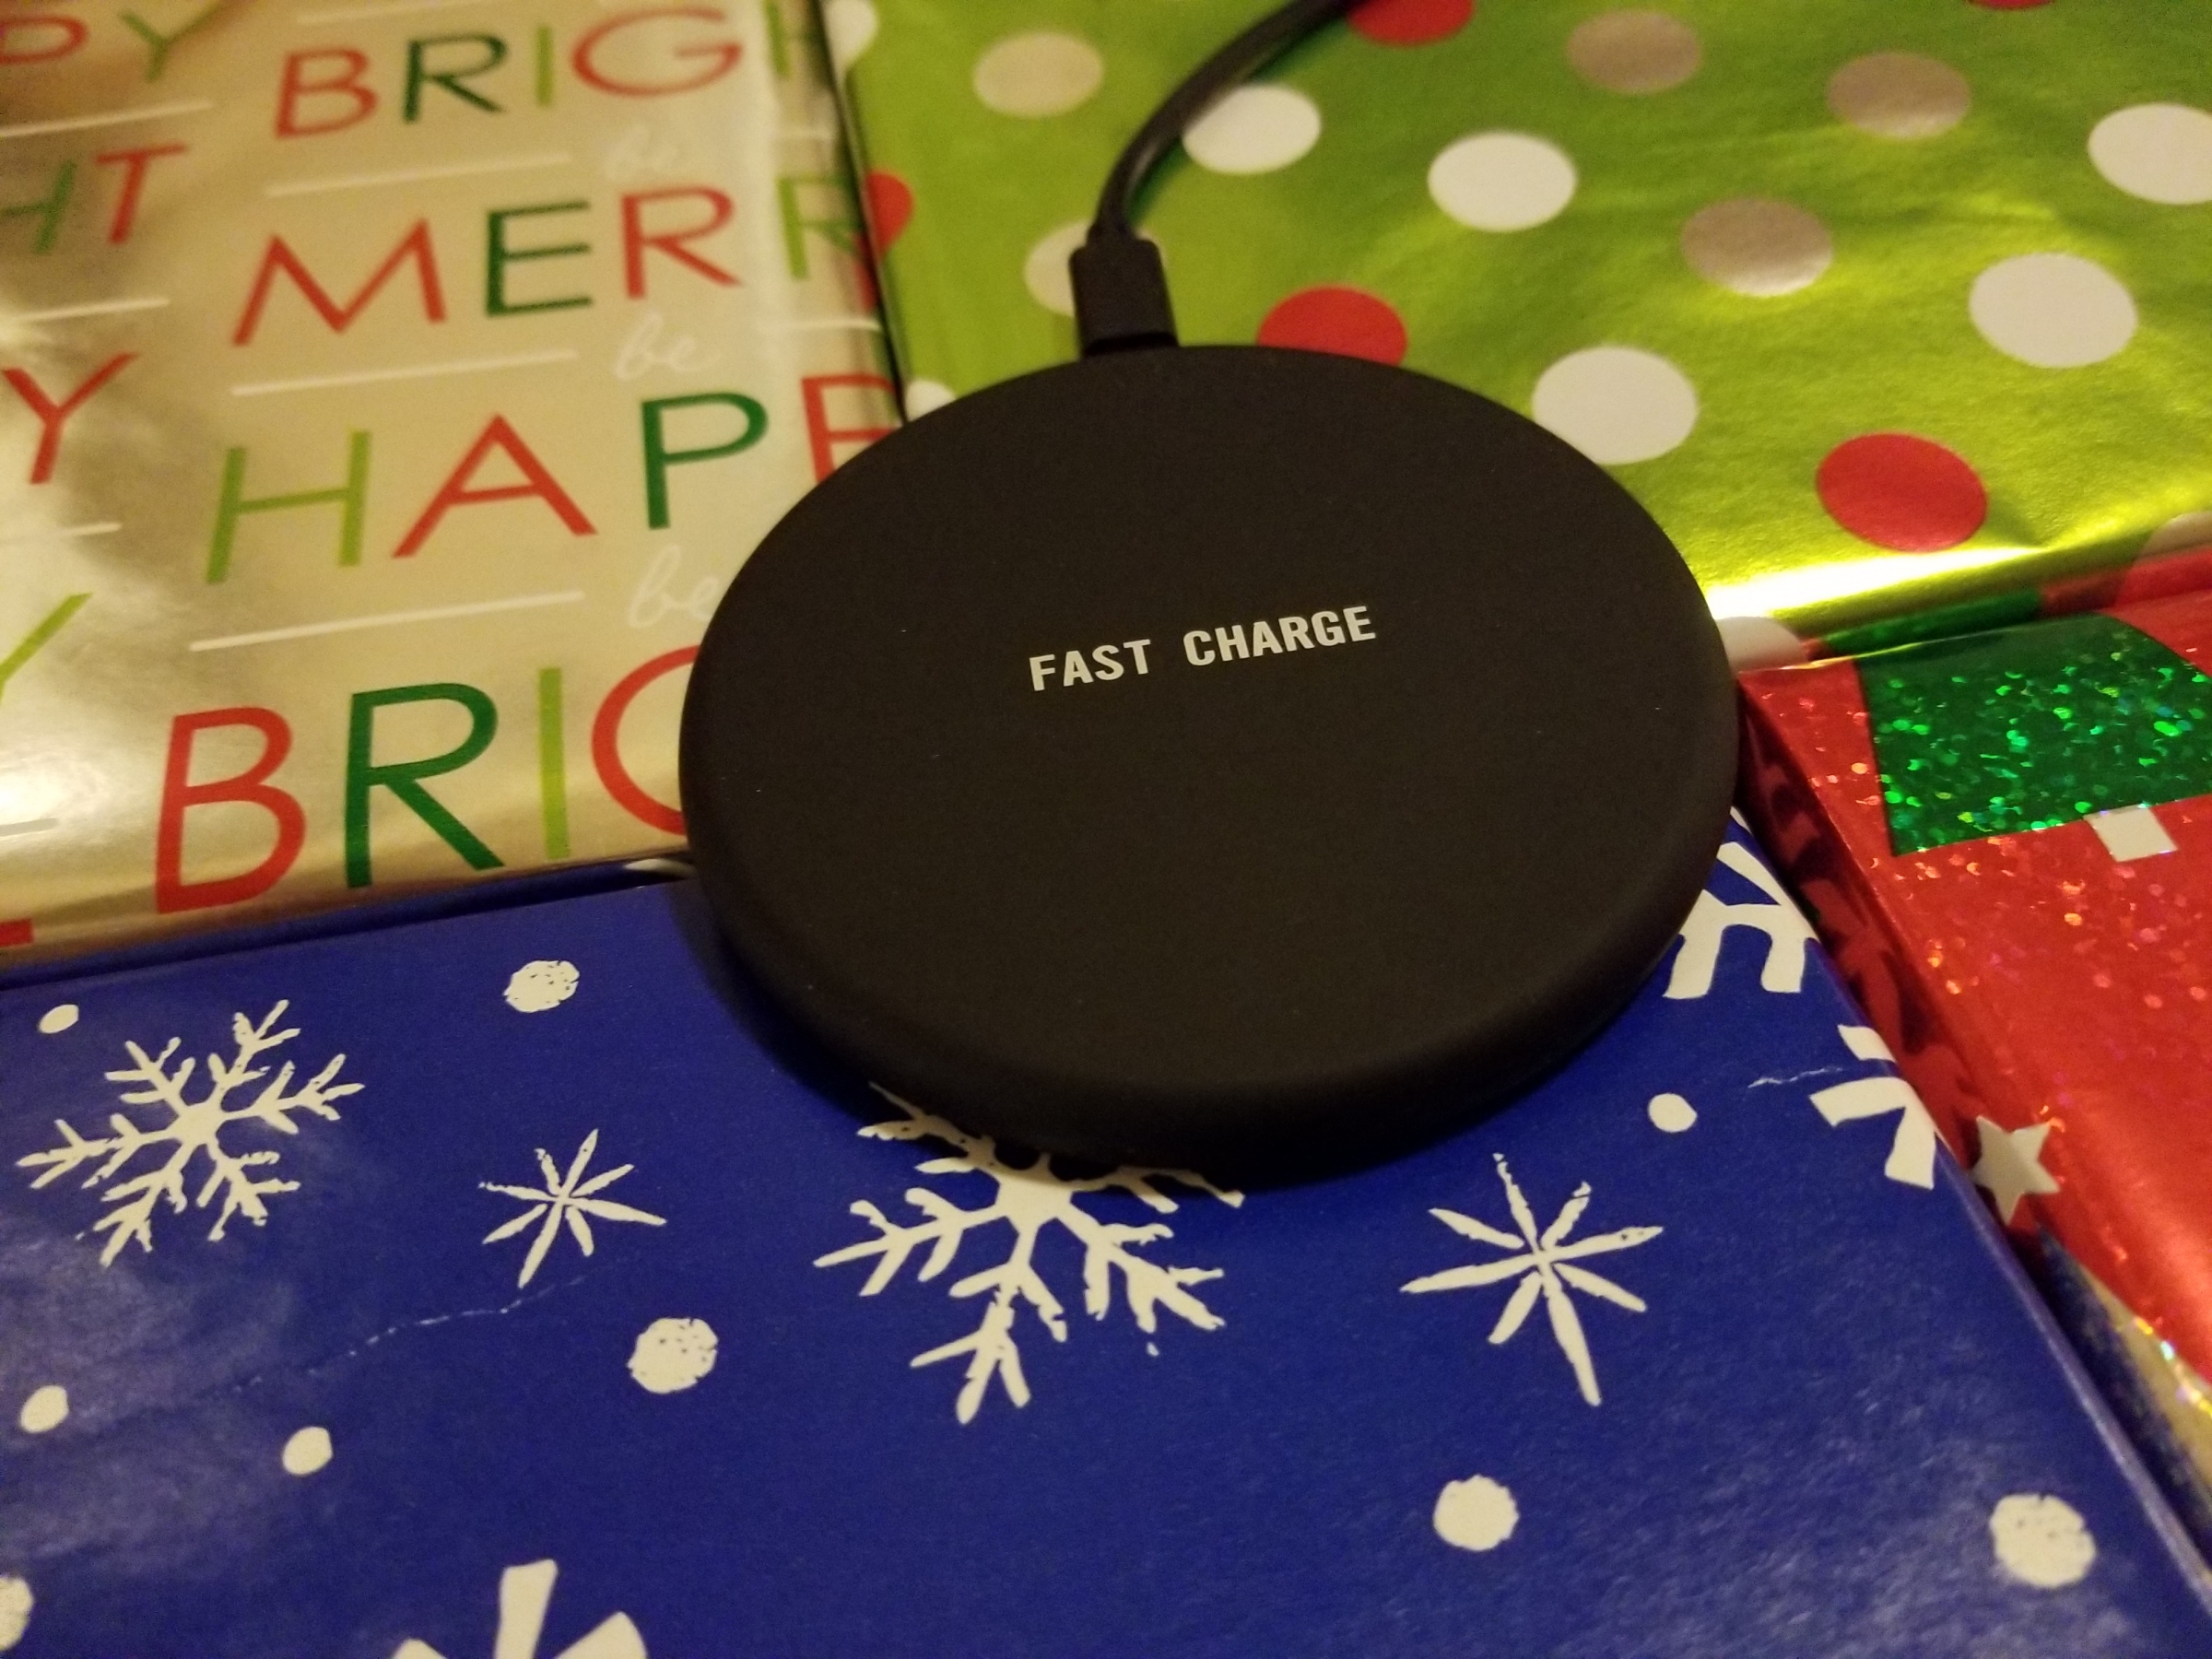 Really fast fast charger.